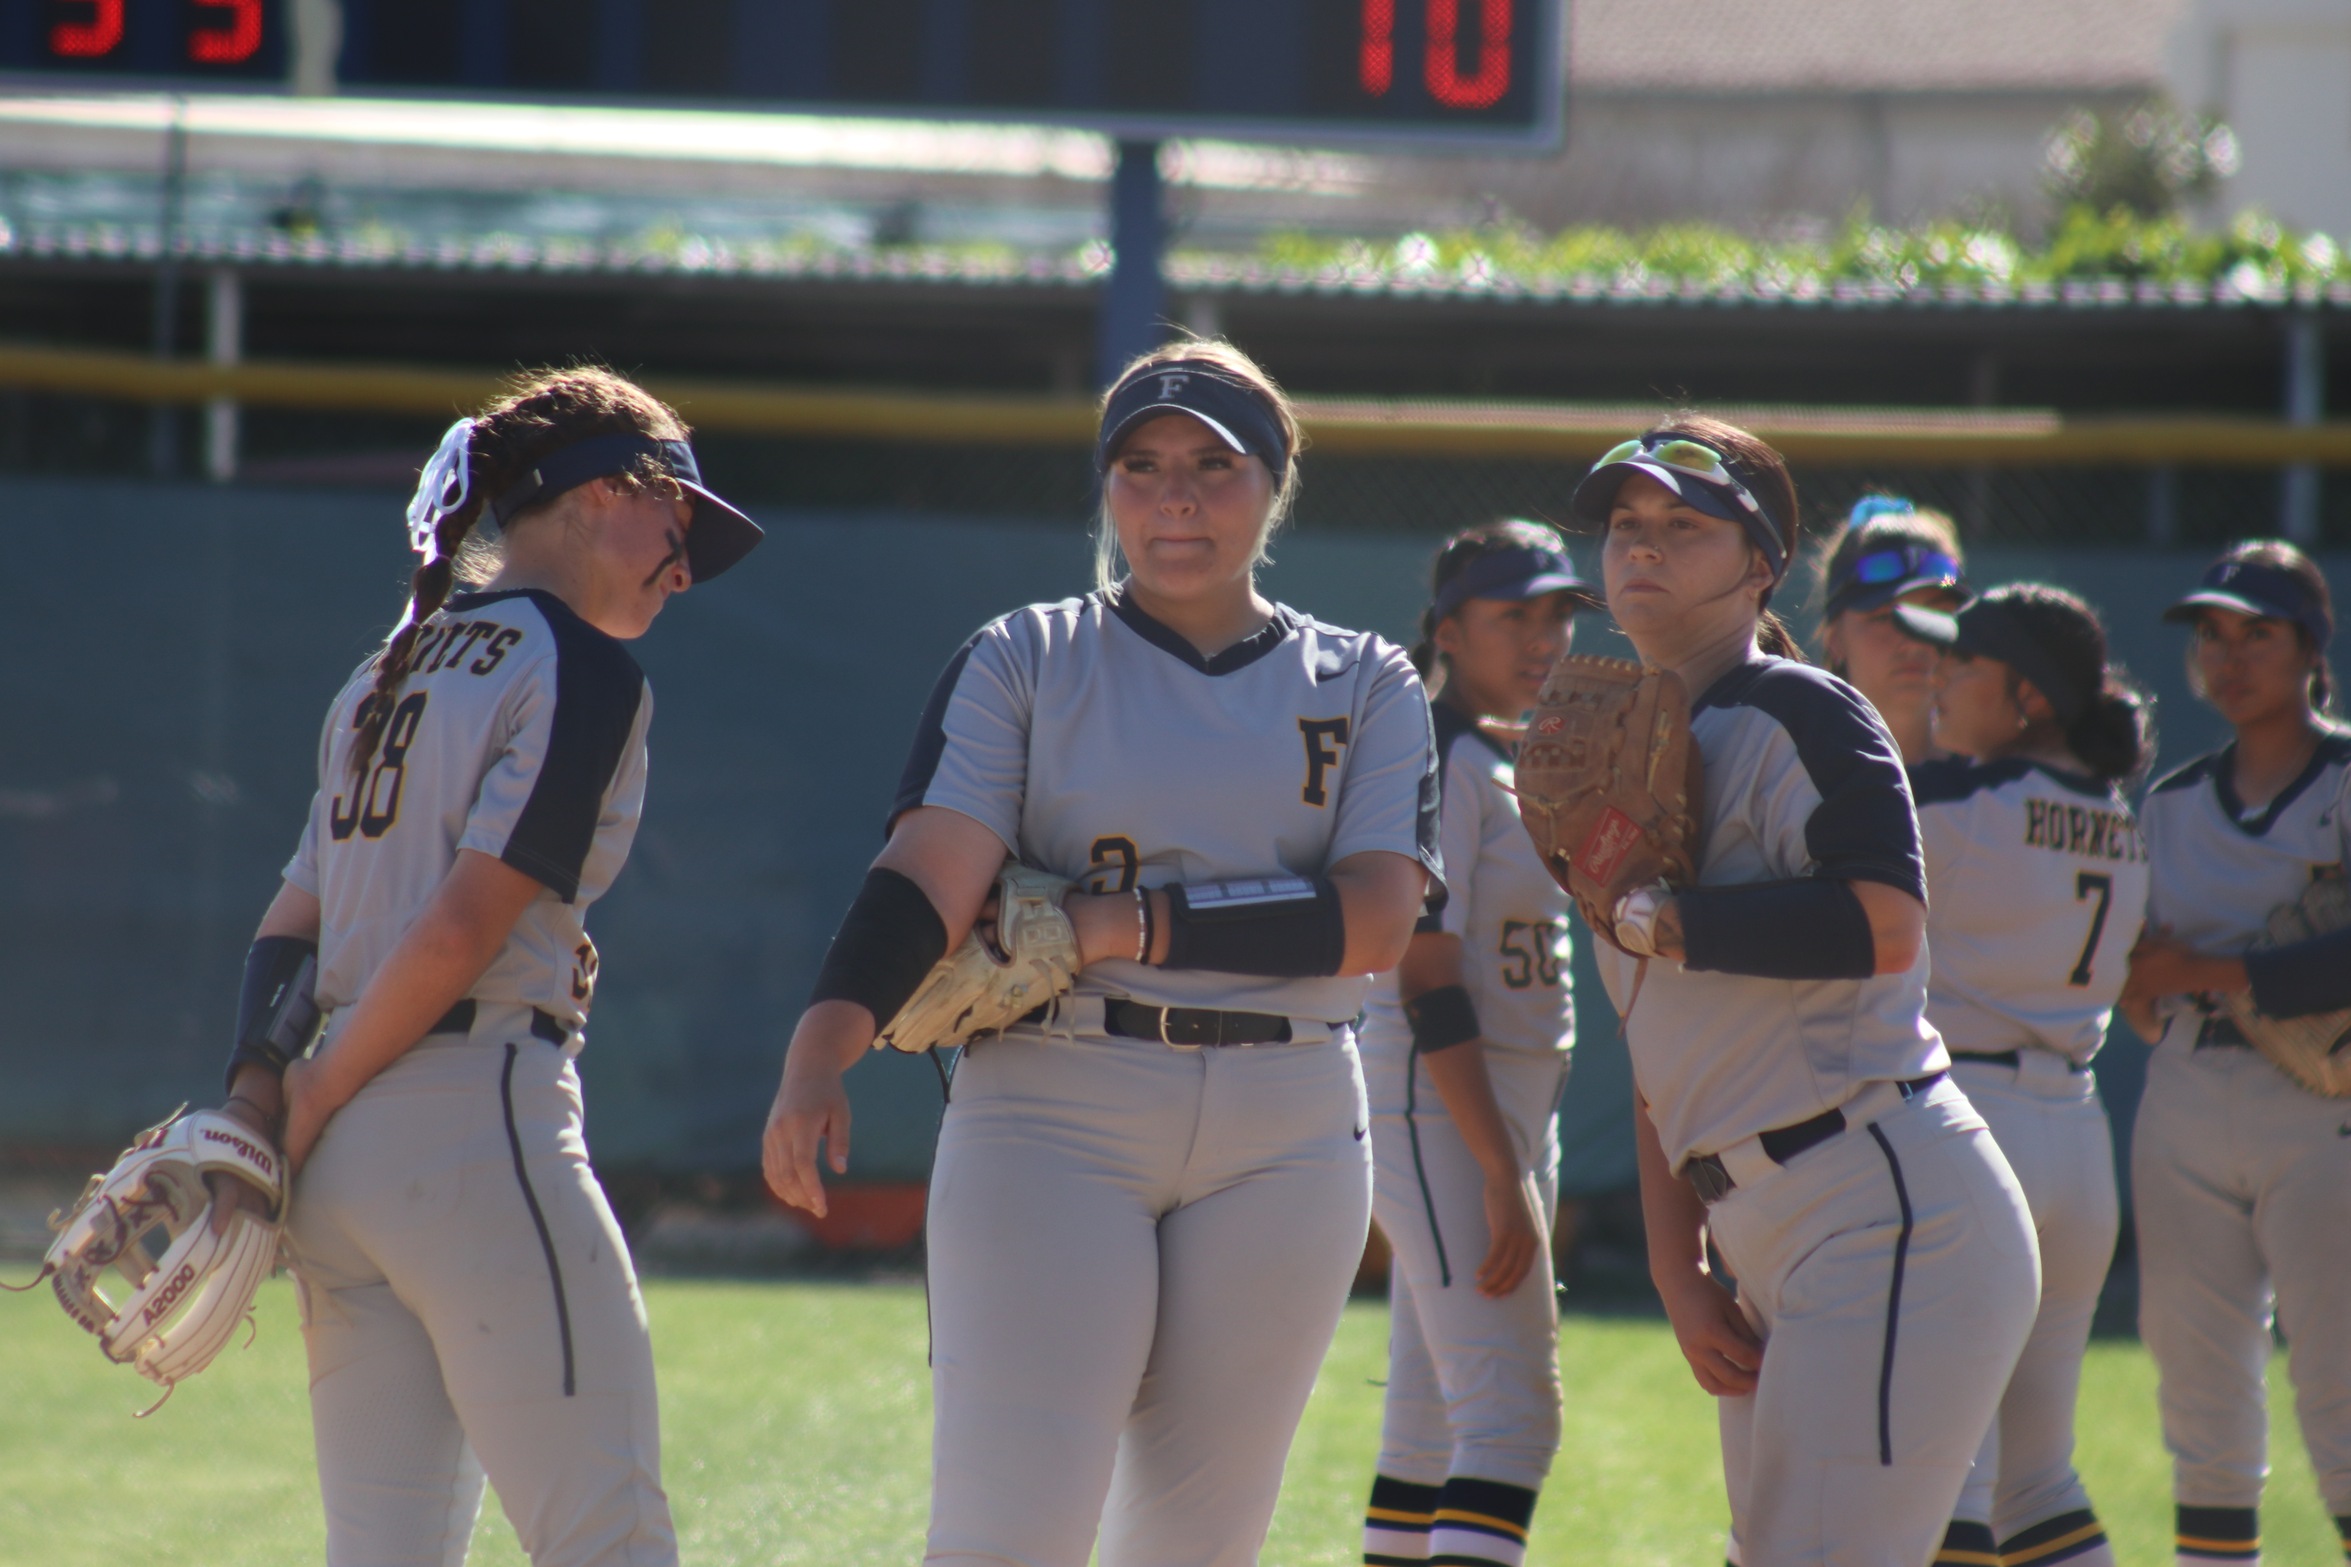 Madison Pevehouse (center) was 3 for 3 with 4 RBI on the day for FC.